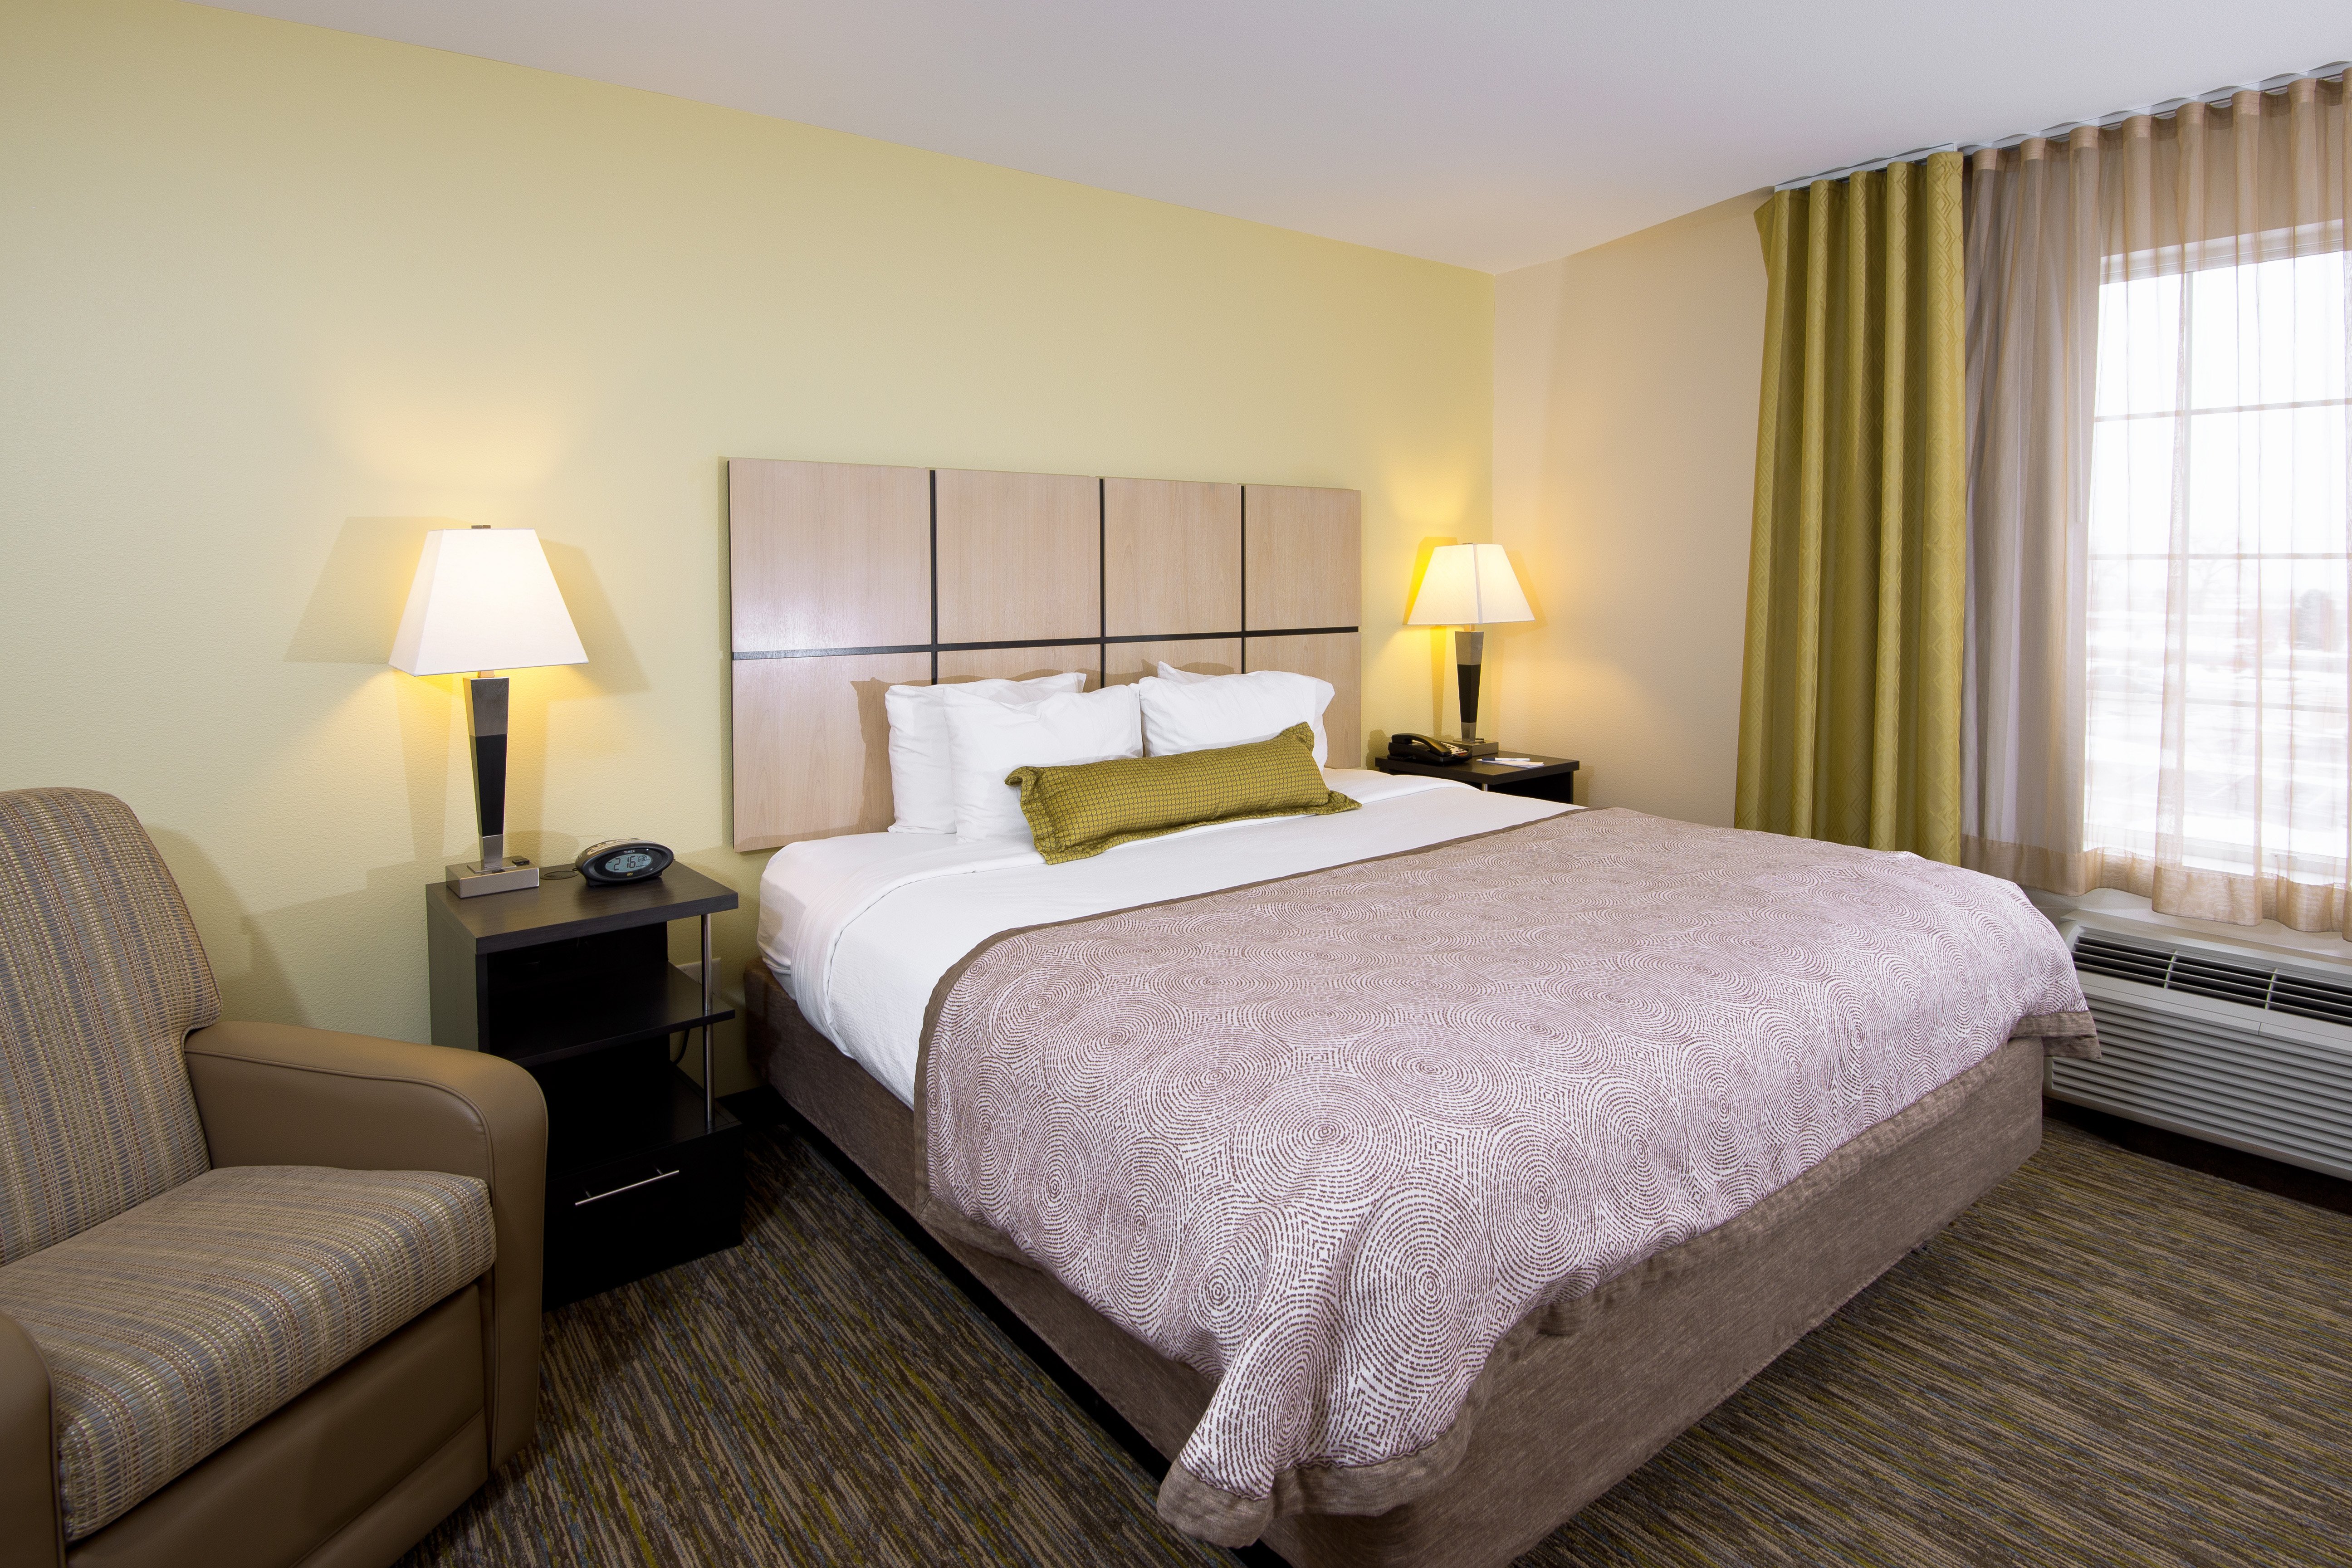 Candlewood Suites Greeley- Apartment style accommodations